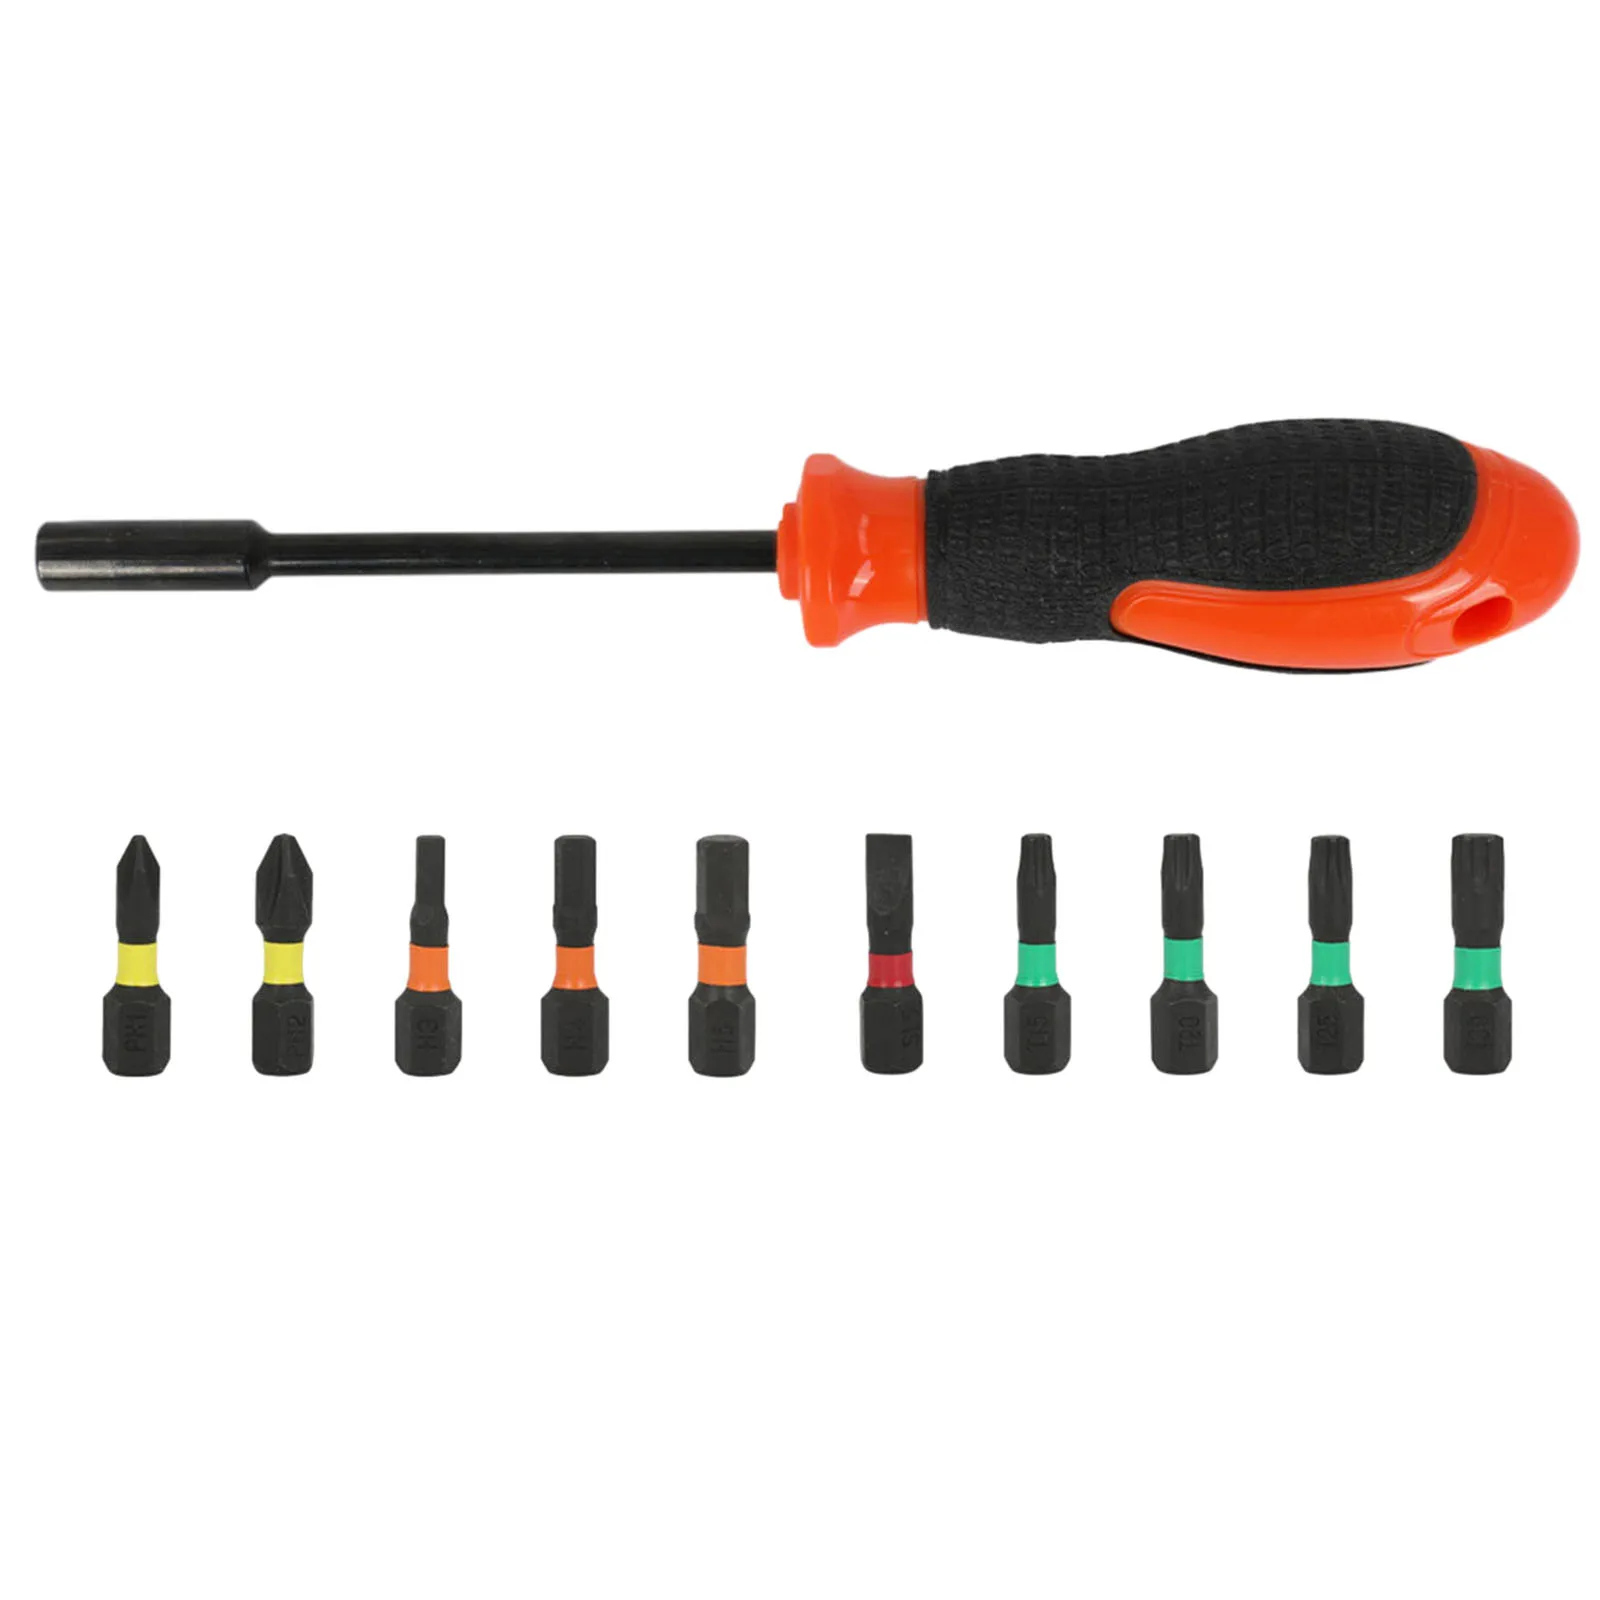 

10 Multifunctional Hex And Cross Screwdriver Bit Adapter With 1pcs Screwdriver Handle PH1/PH2/H3/H4/H5/SL5/T15/T20/T25/T30